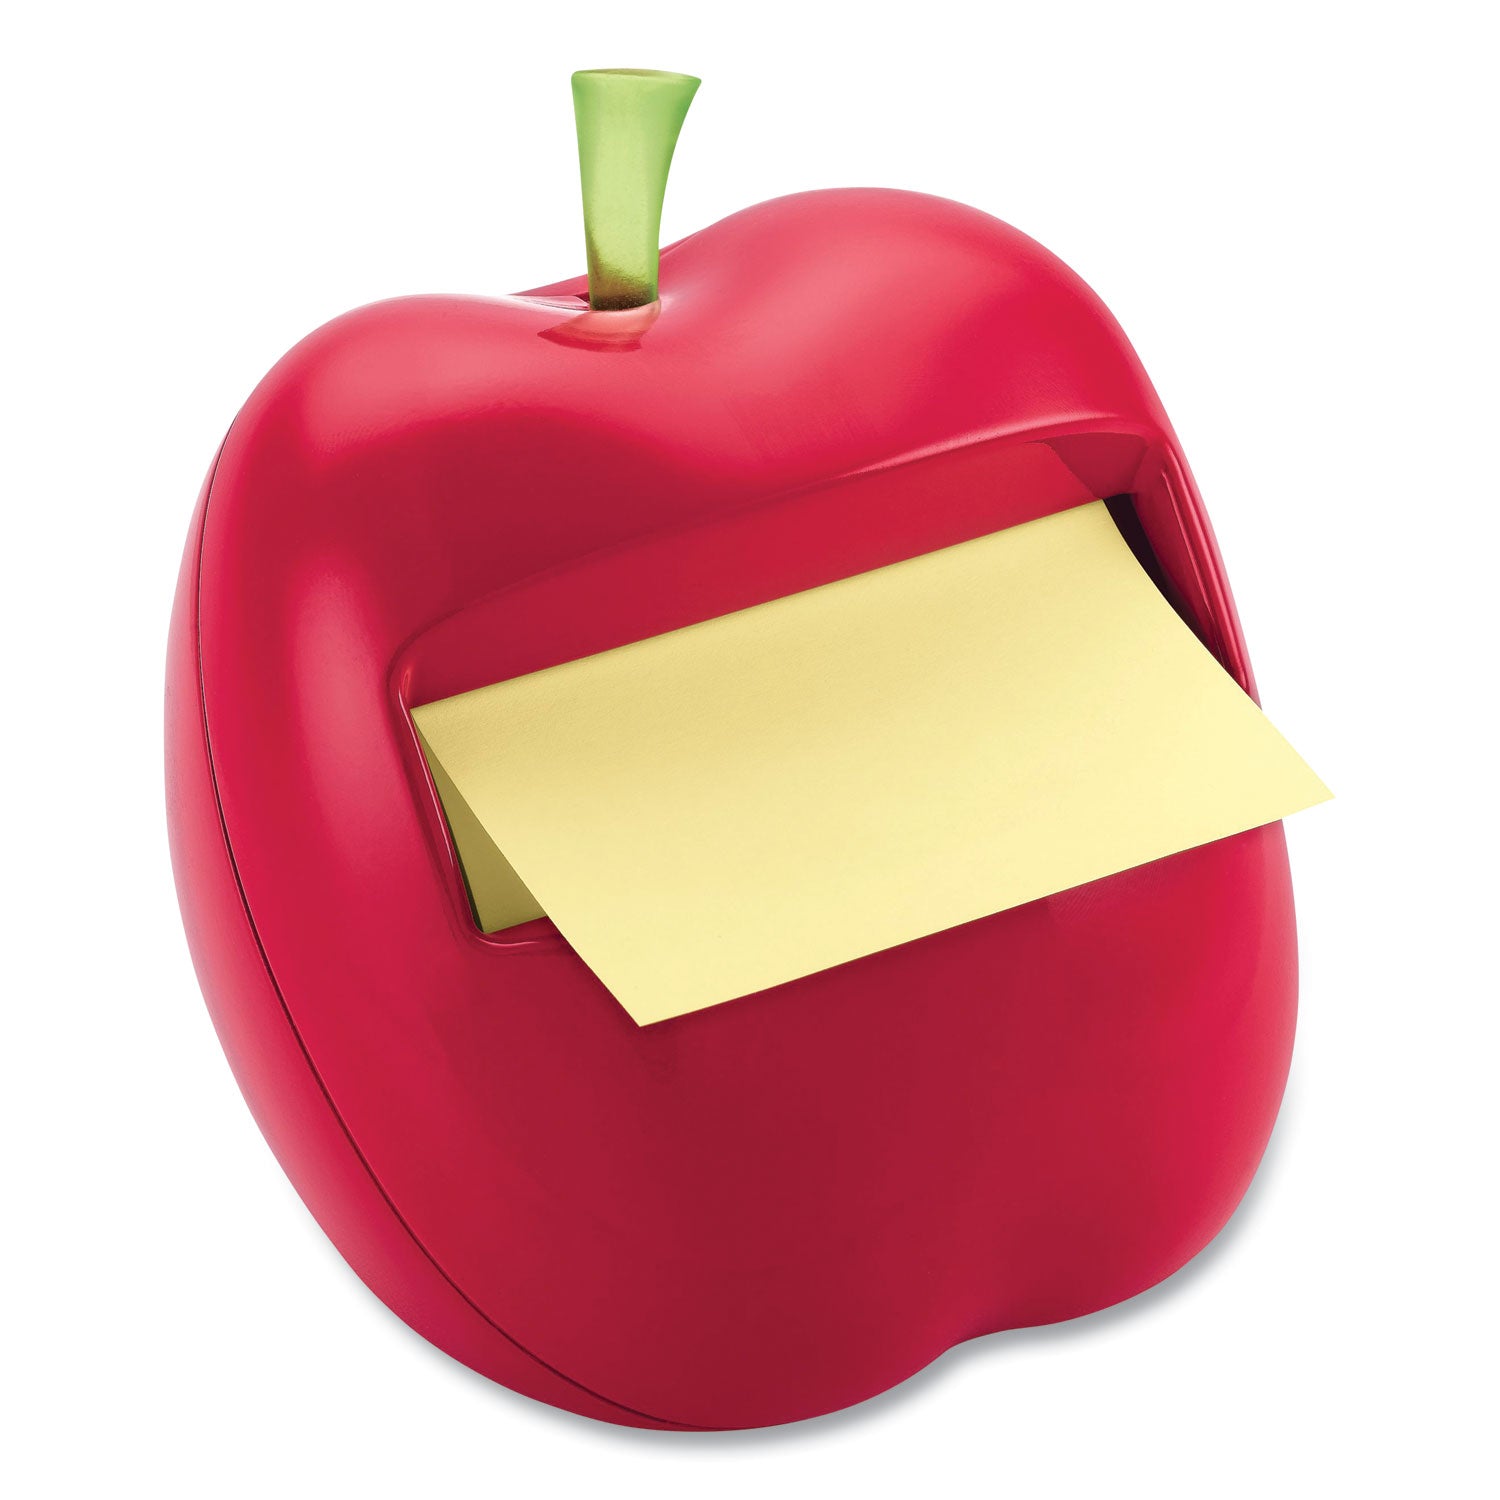 apple-shaped-dispenser-for-3-x-3-pads-red-includes-50-sheet-canary-yellow-pop-up-pad_mmmapl330 - 1